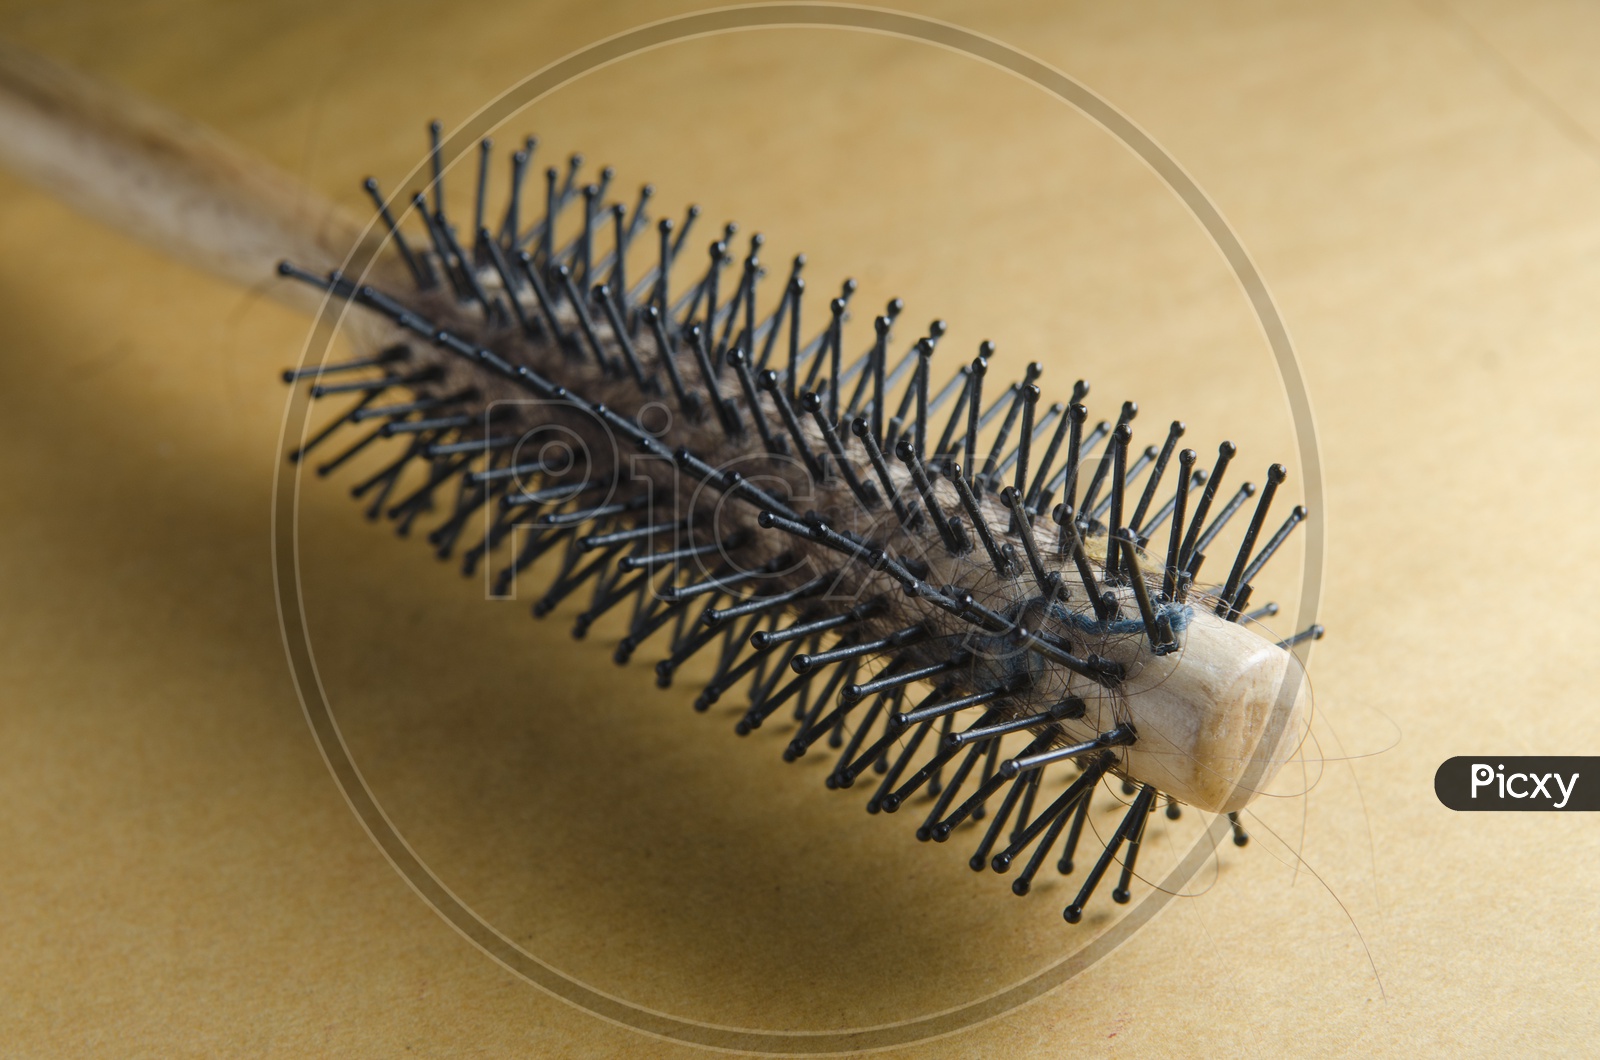 A Black comb with hair loss